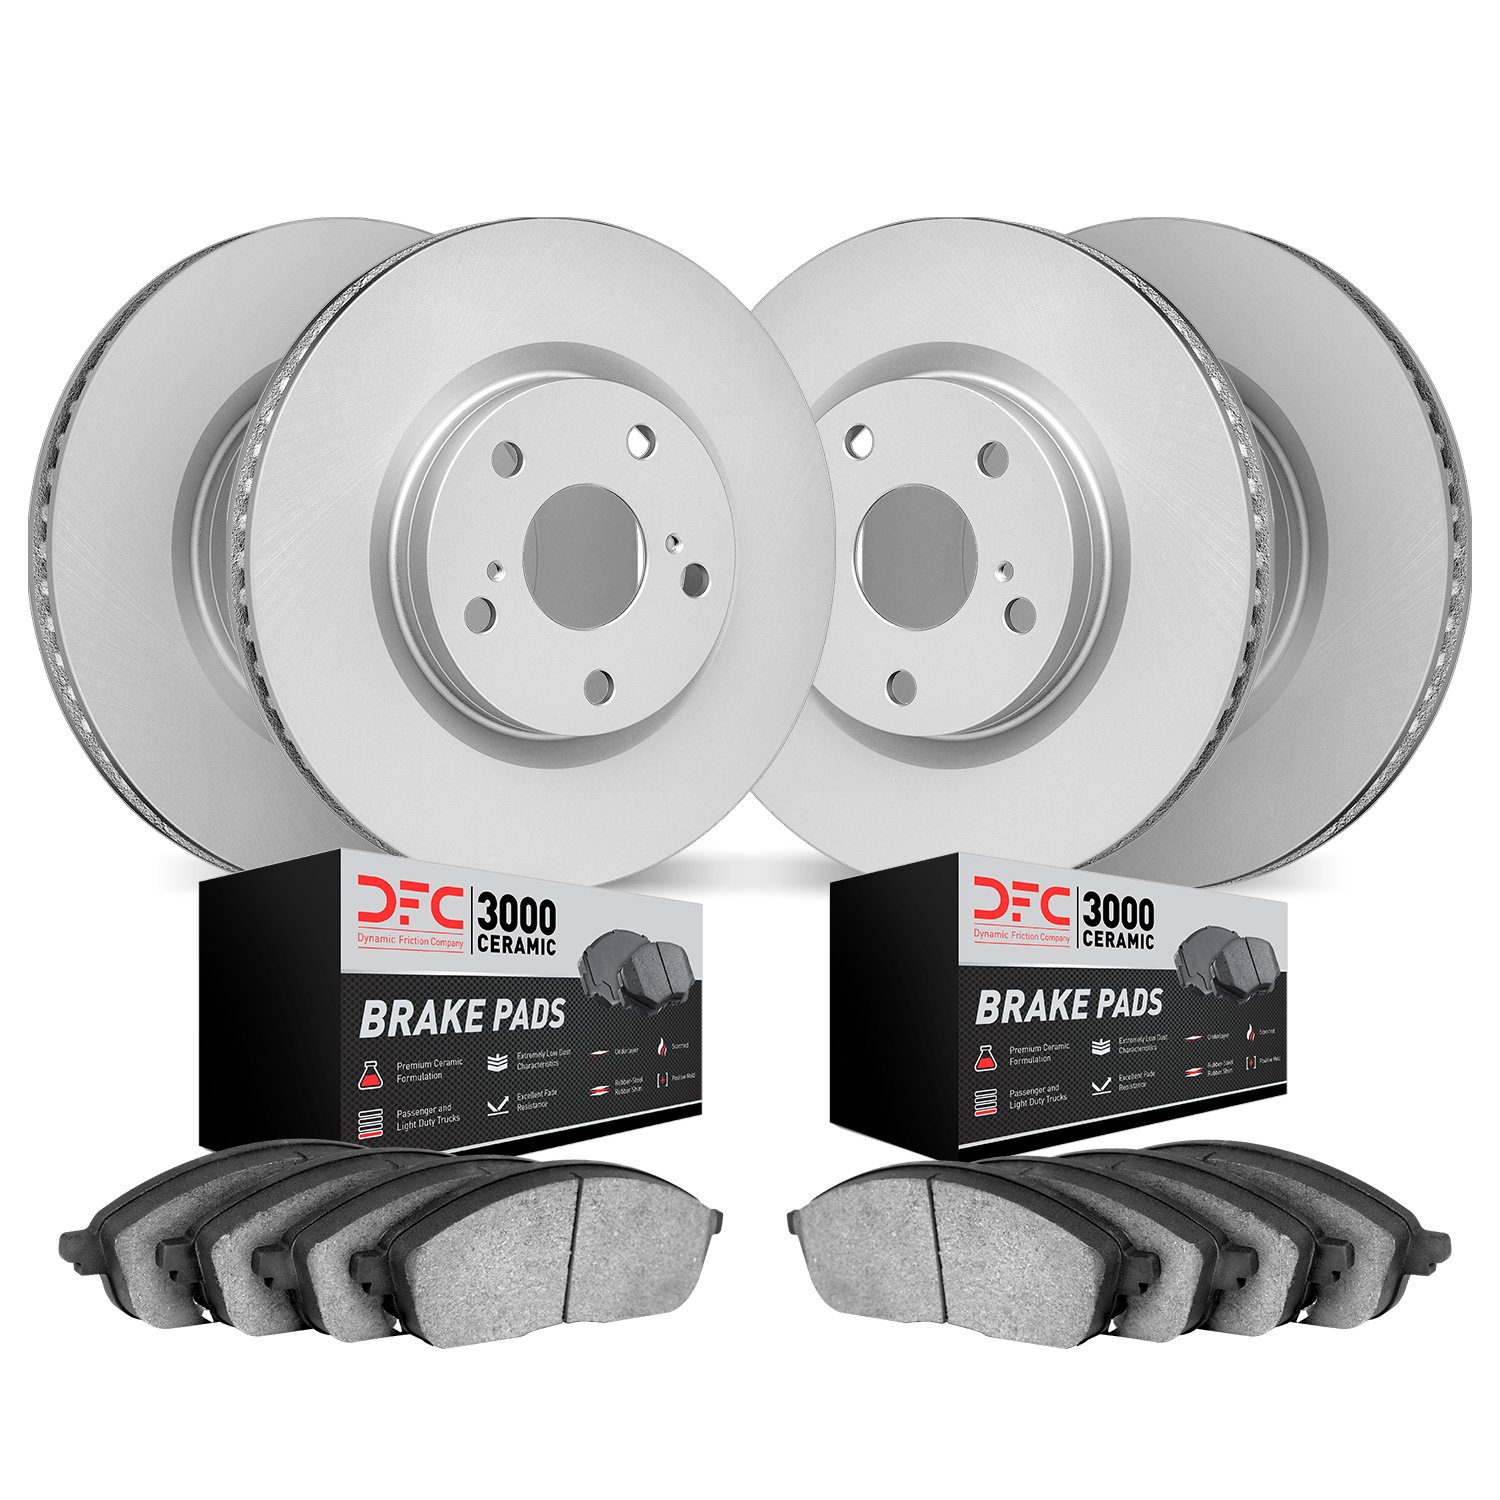 4304-73031 Geospec Brake Rotors with 3000-Series Ceramic Brake Pads Kit, 2008-2011 Audi/Volkswagen, Position: Front and Rear